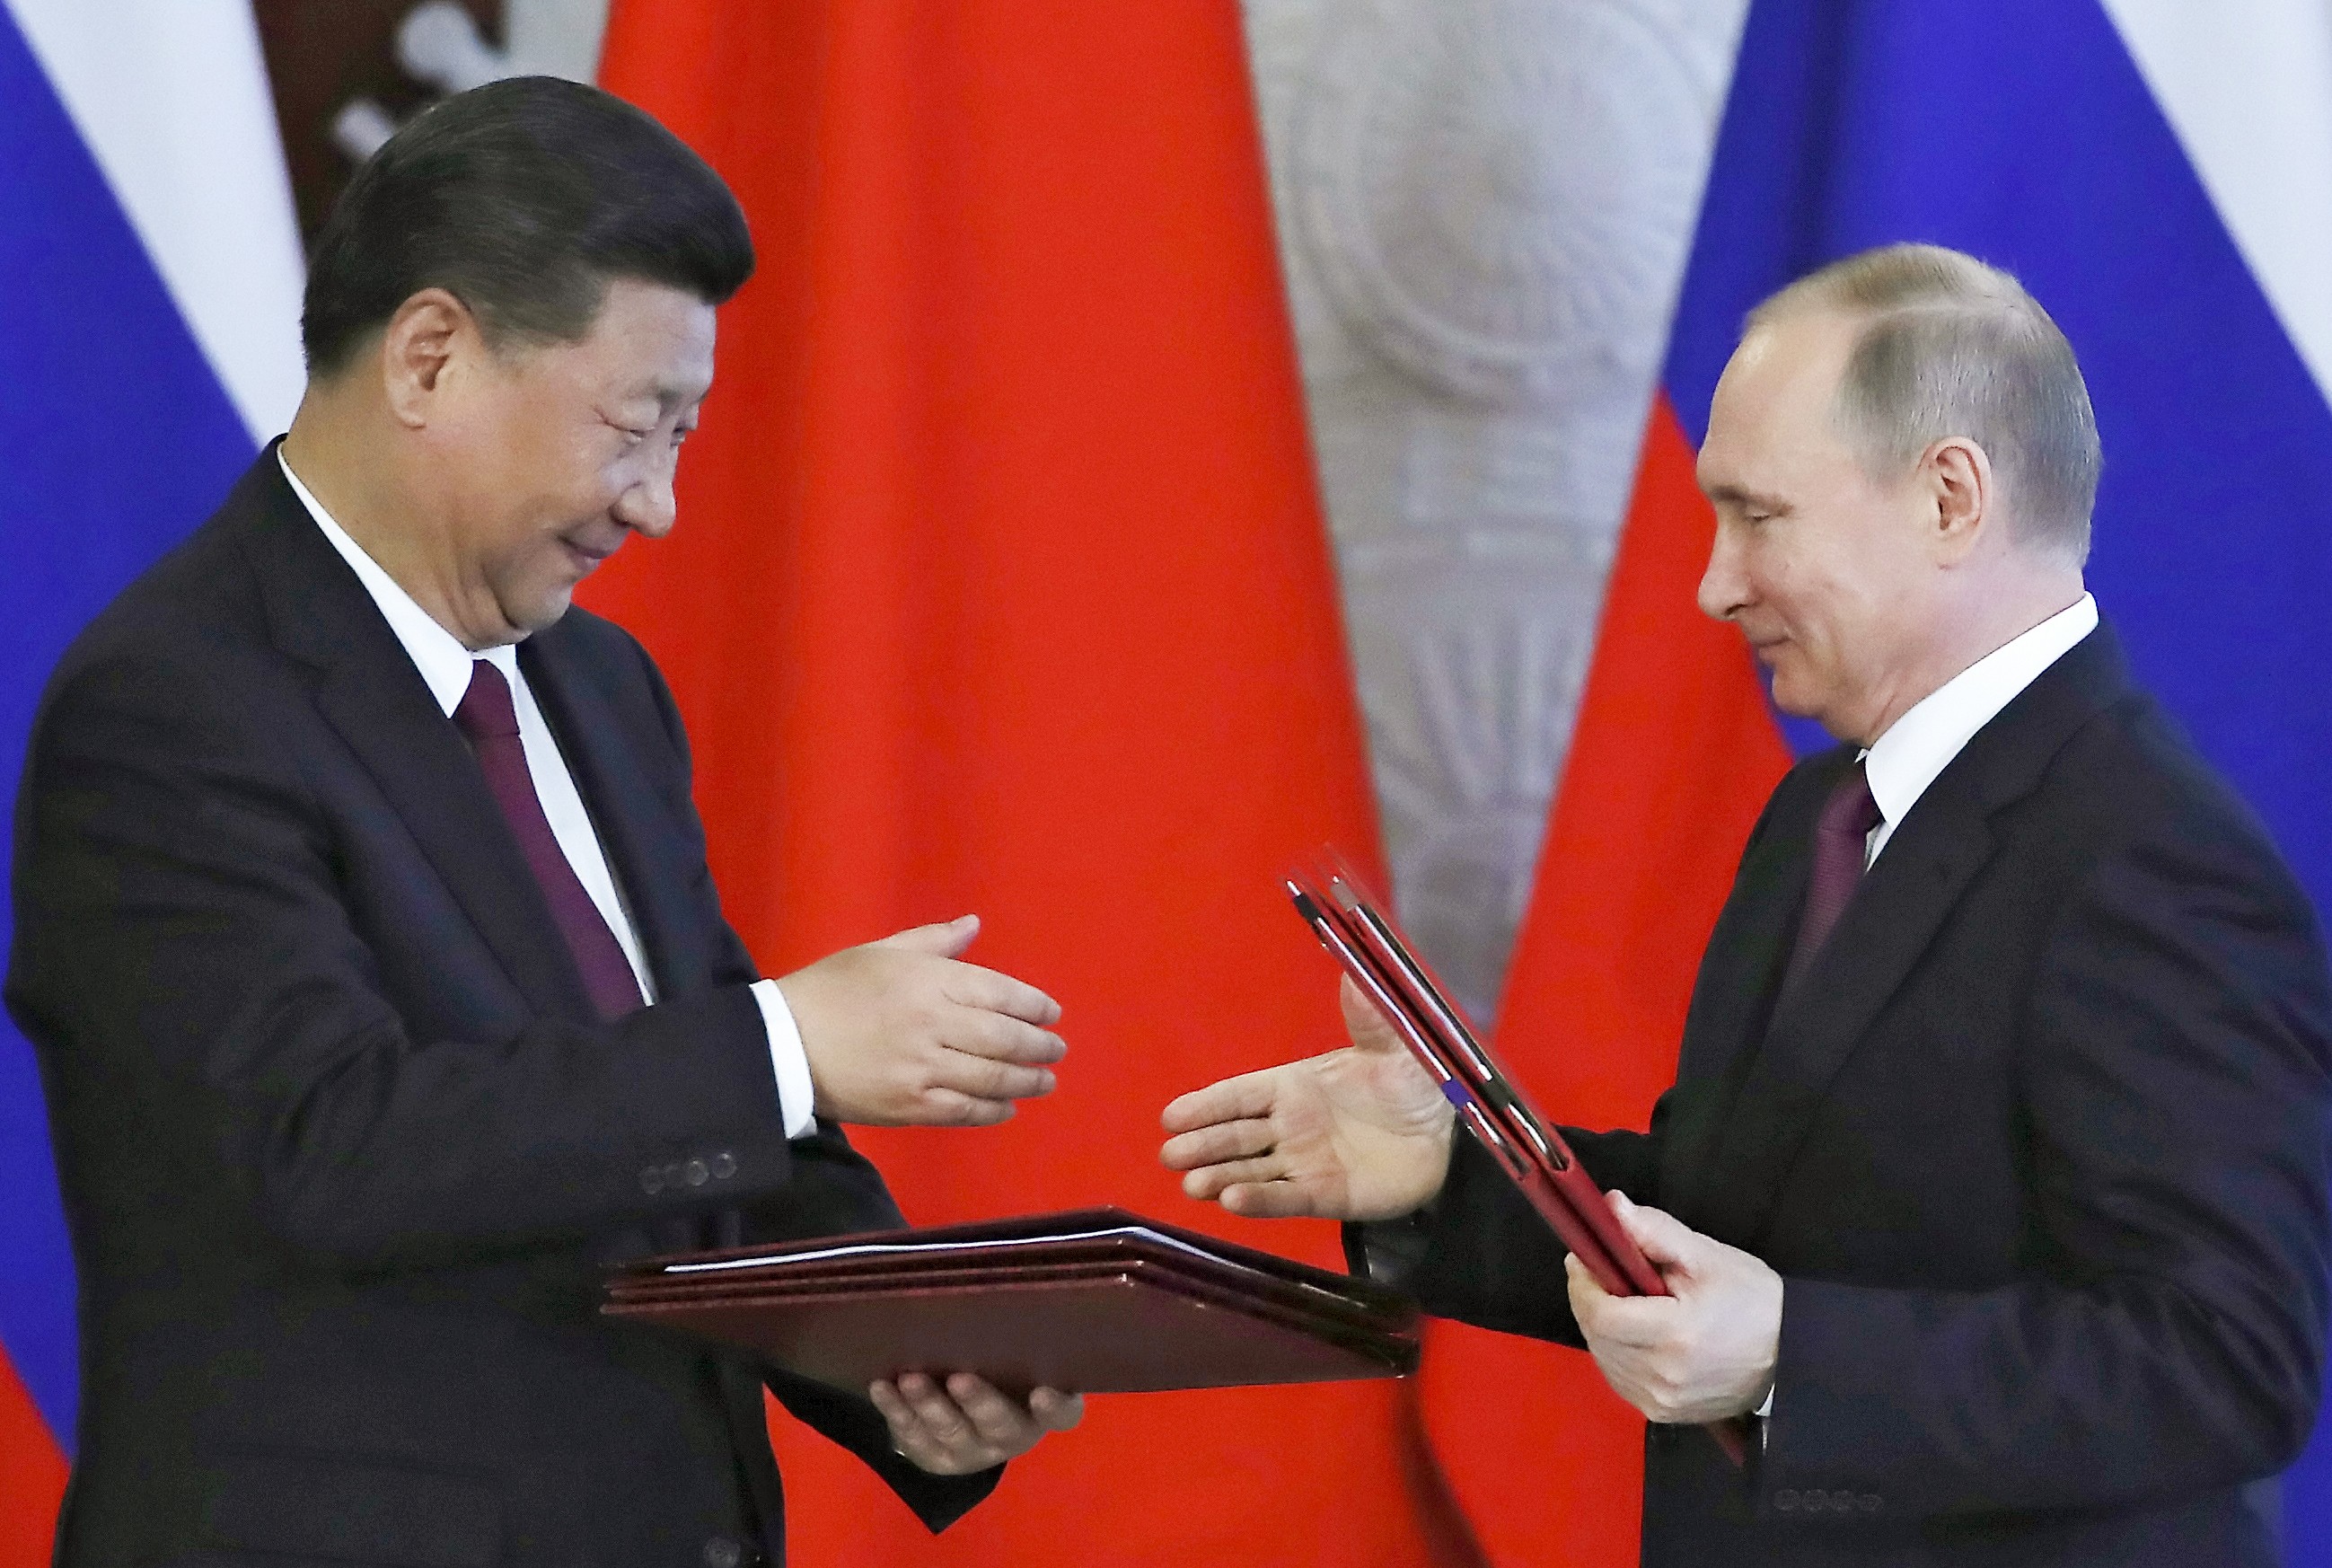 Russian President Vladimir Putin (right) and Chinese President Xi Jinping at a ceremony following their talks in the Kremlin in Moscow in July 2017. China could be learning from Russian activities in cyberspace. Photo: AP